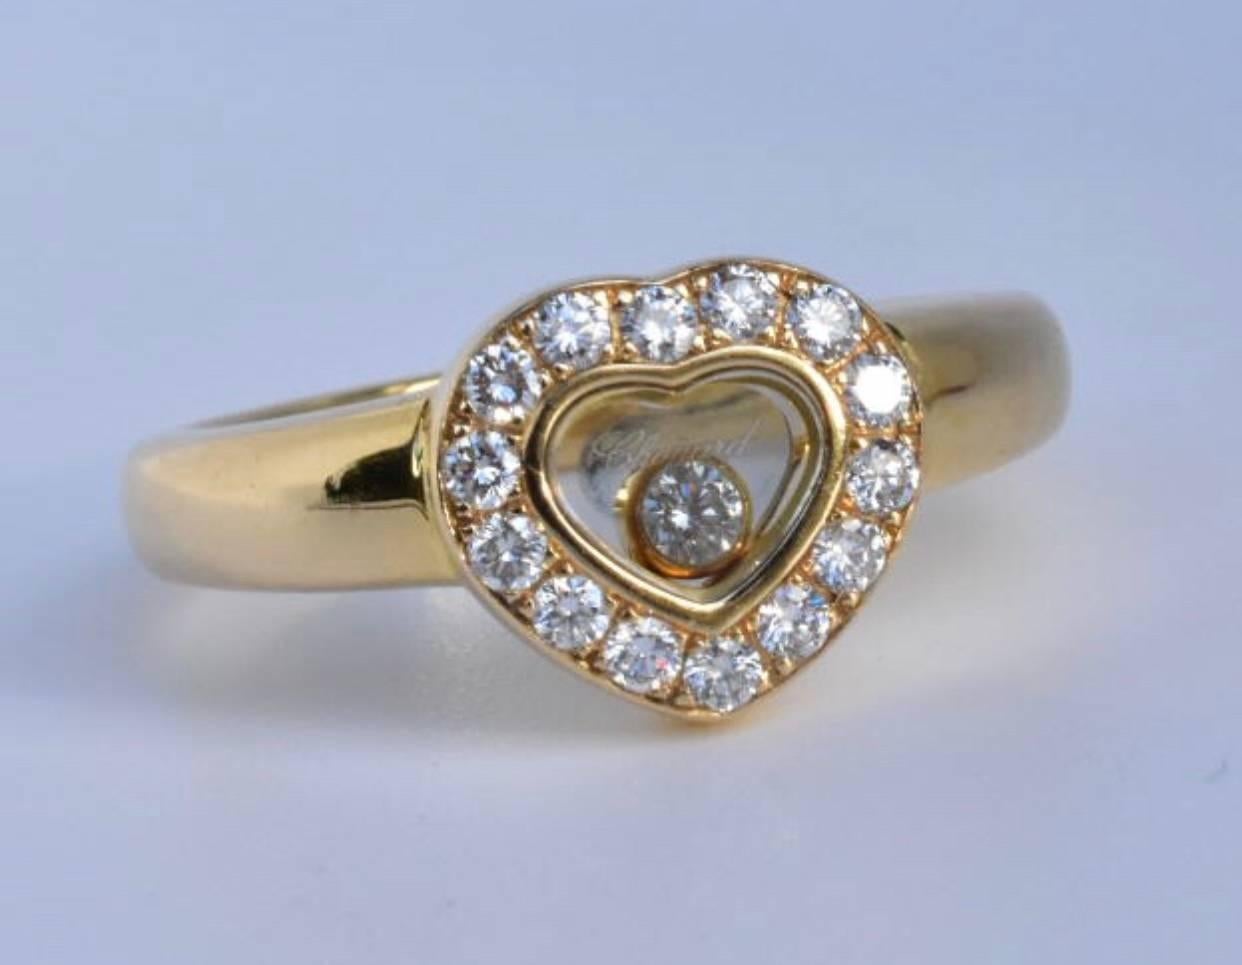 A Chopard Happy Diamond ring set in 18k yellow gold. The ring features one free moving brilliant cut diamond under a sapphire glass of approx 0.05 carats and has fourteen brilliant cut round diamonds with the heart design.
The ring is sold with the